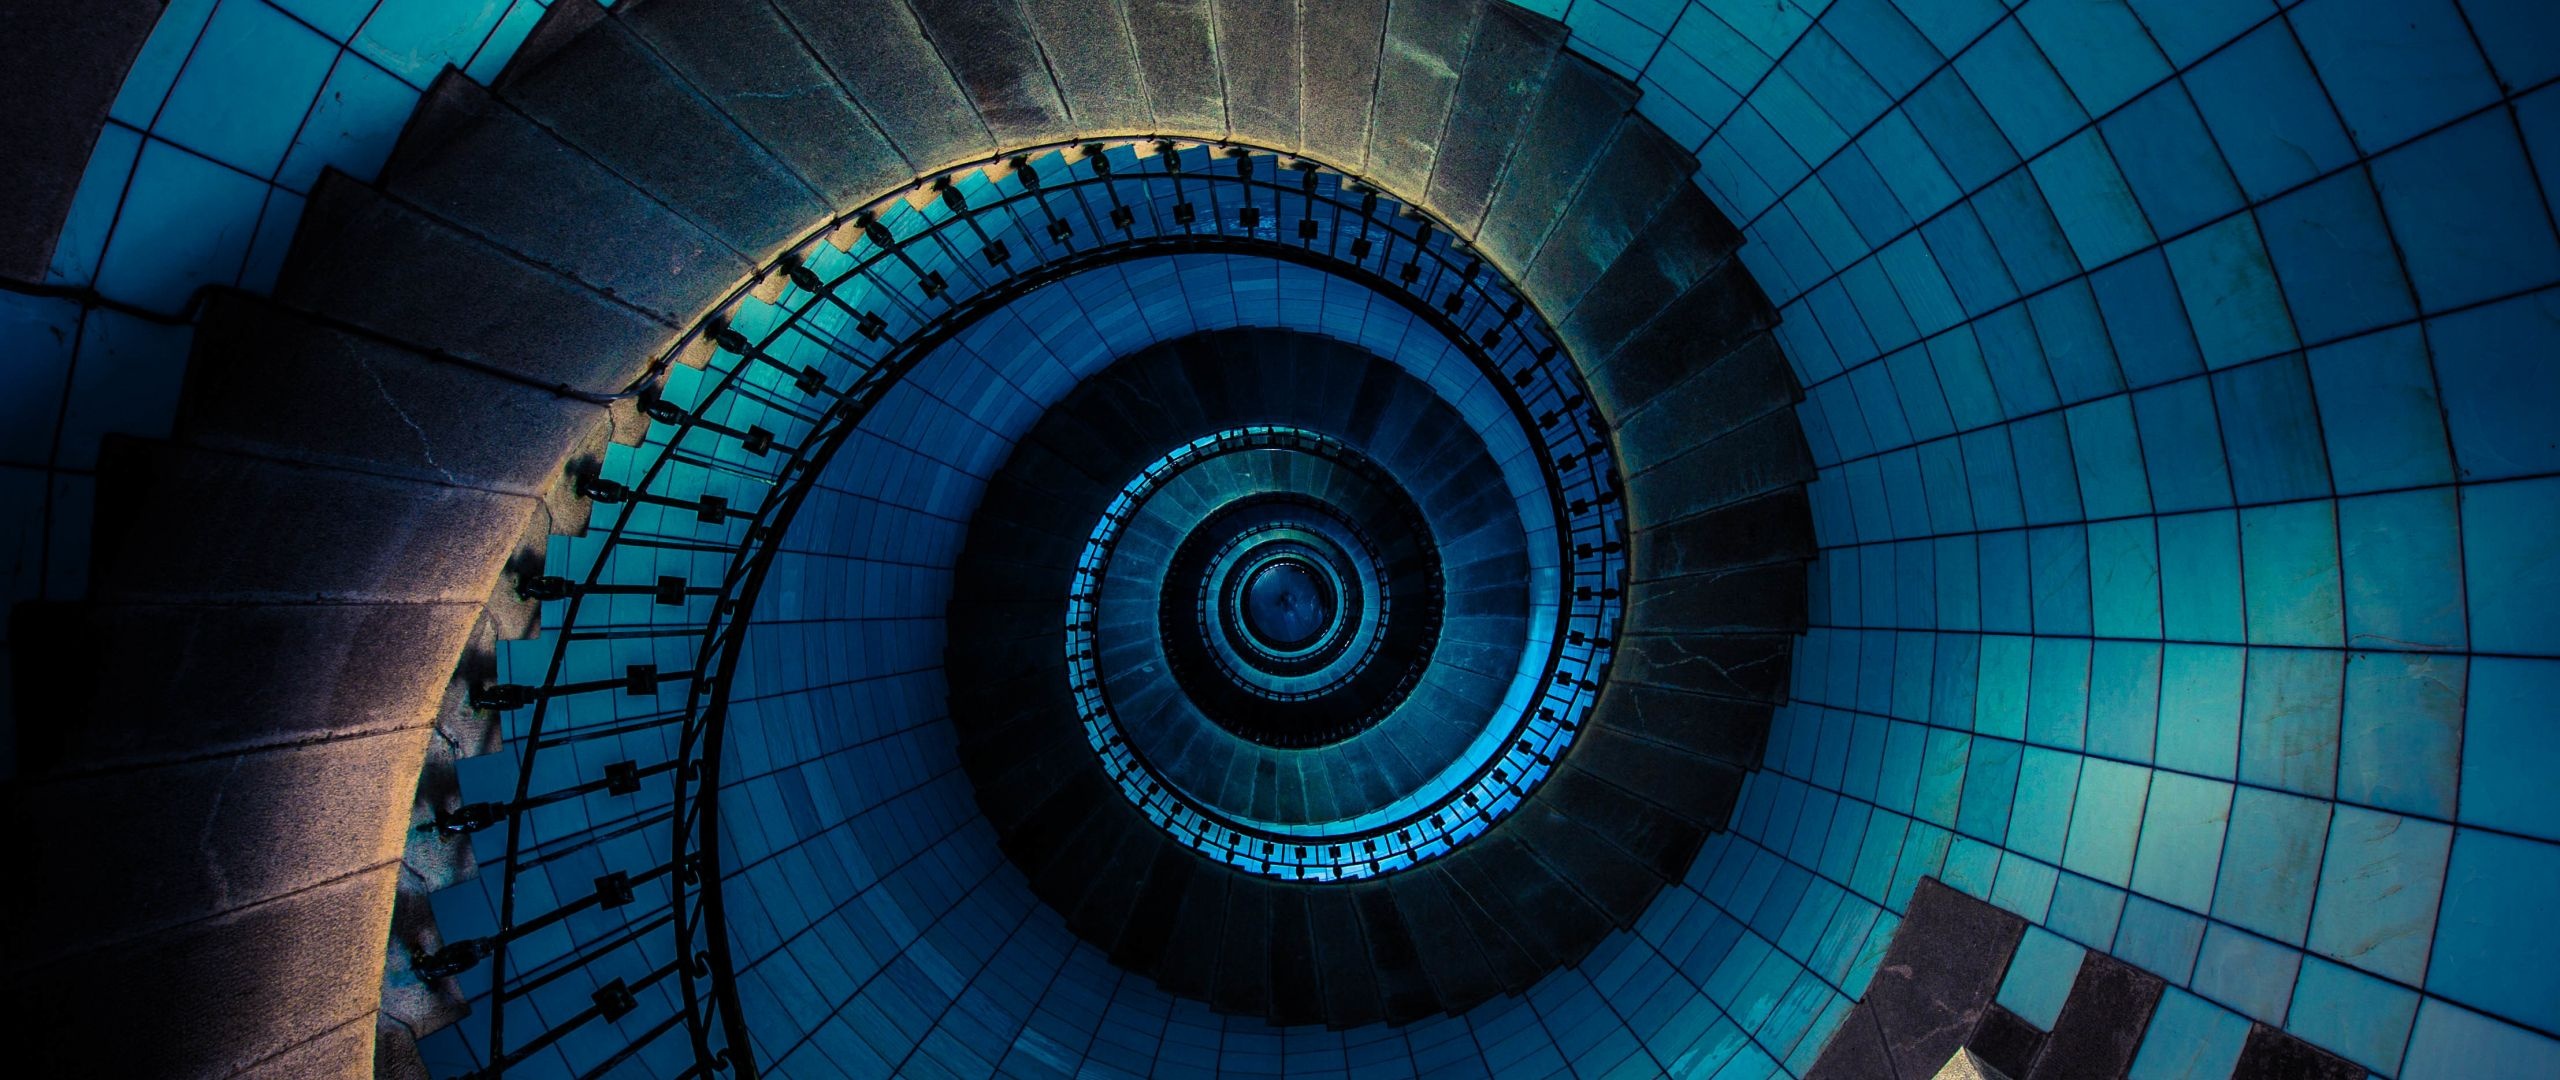 Spiral stairs, Top free, Backgrounds, 2560x1080 Dual Screen Desktop